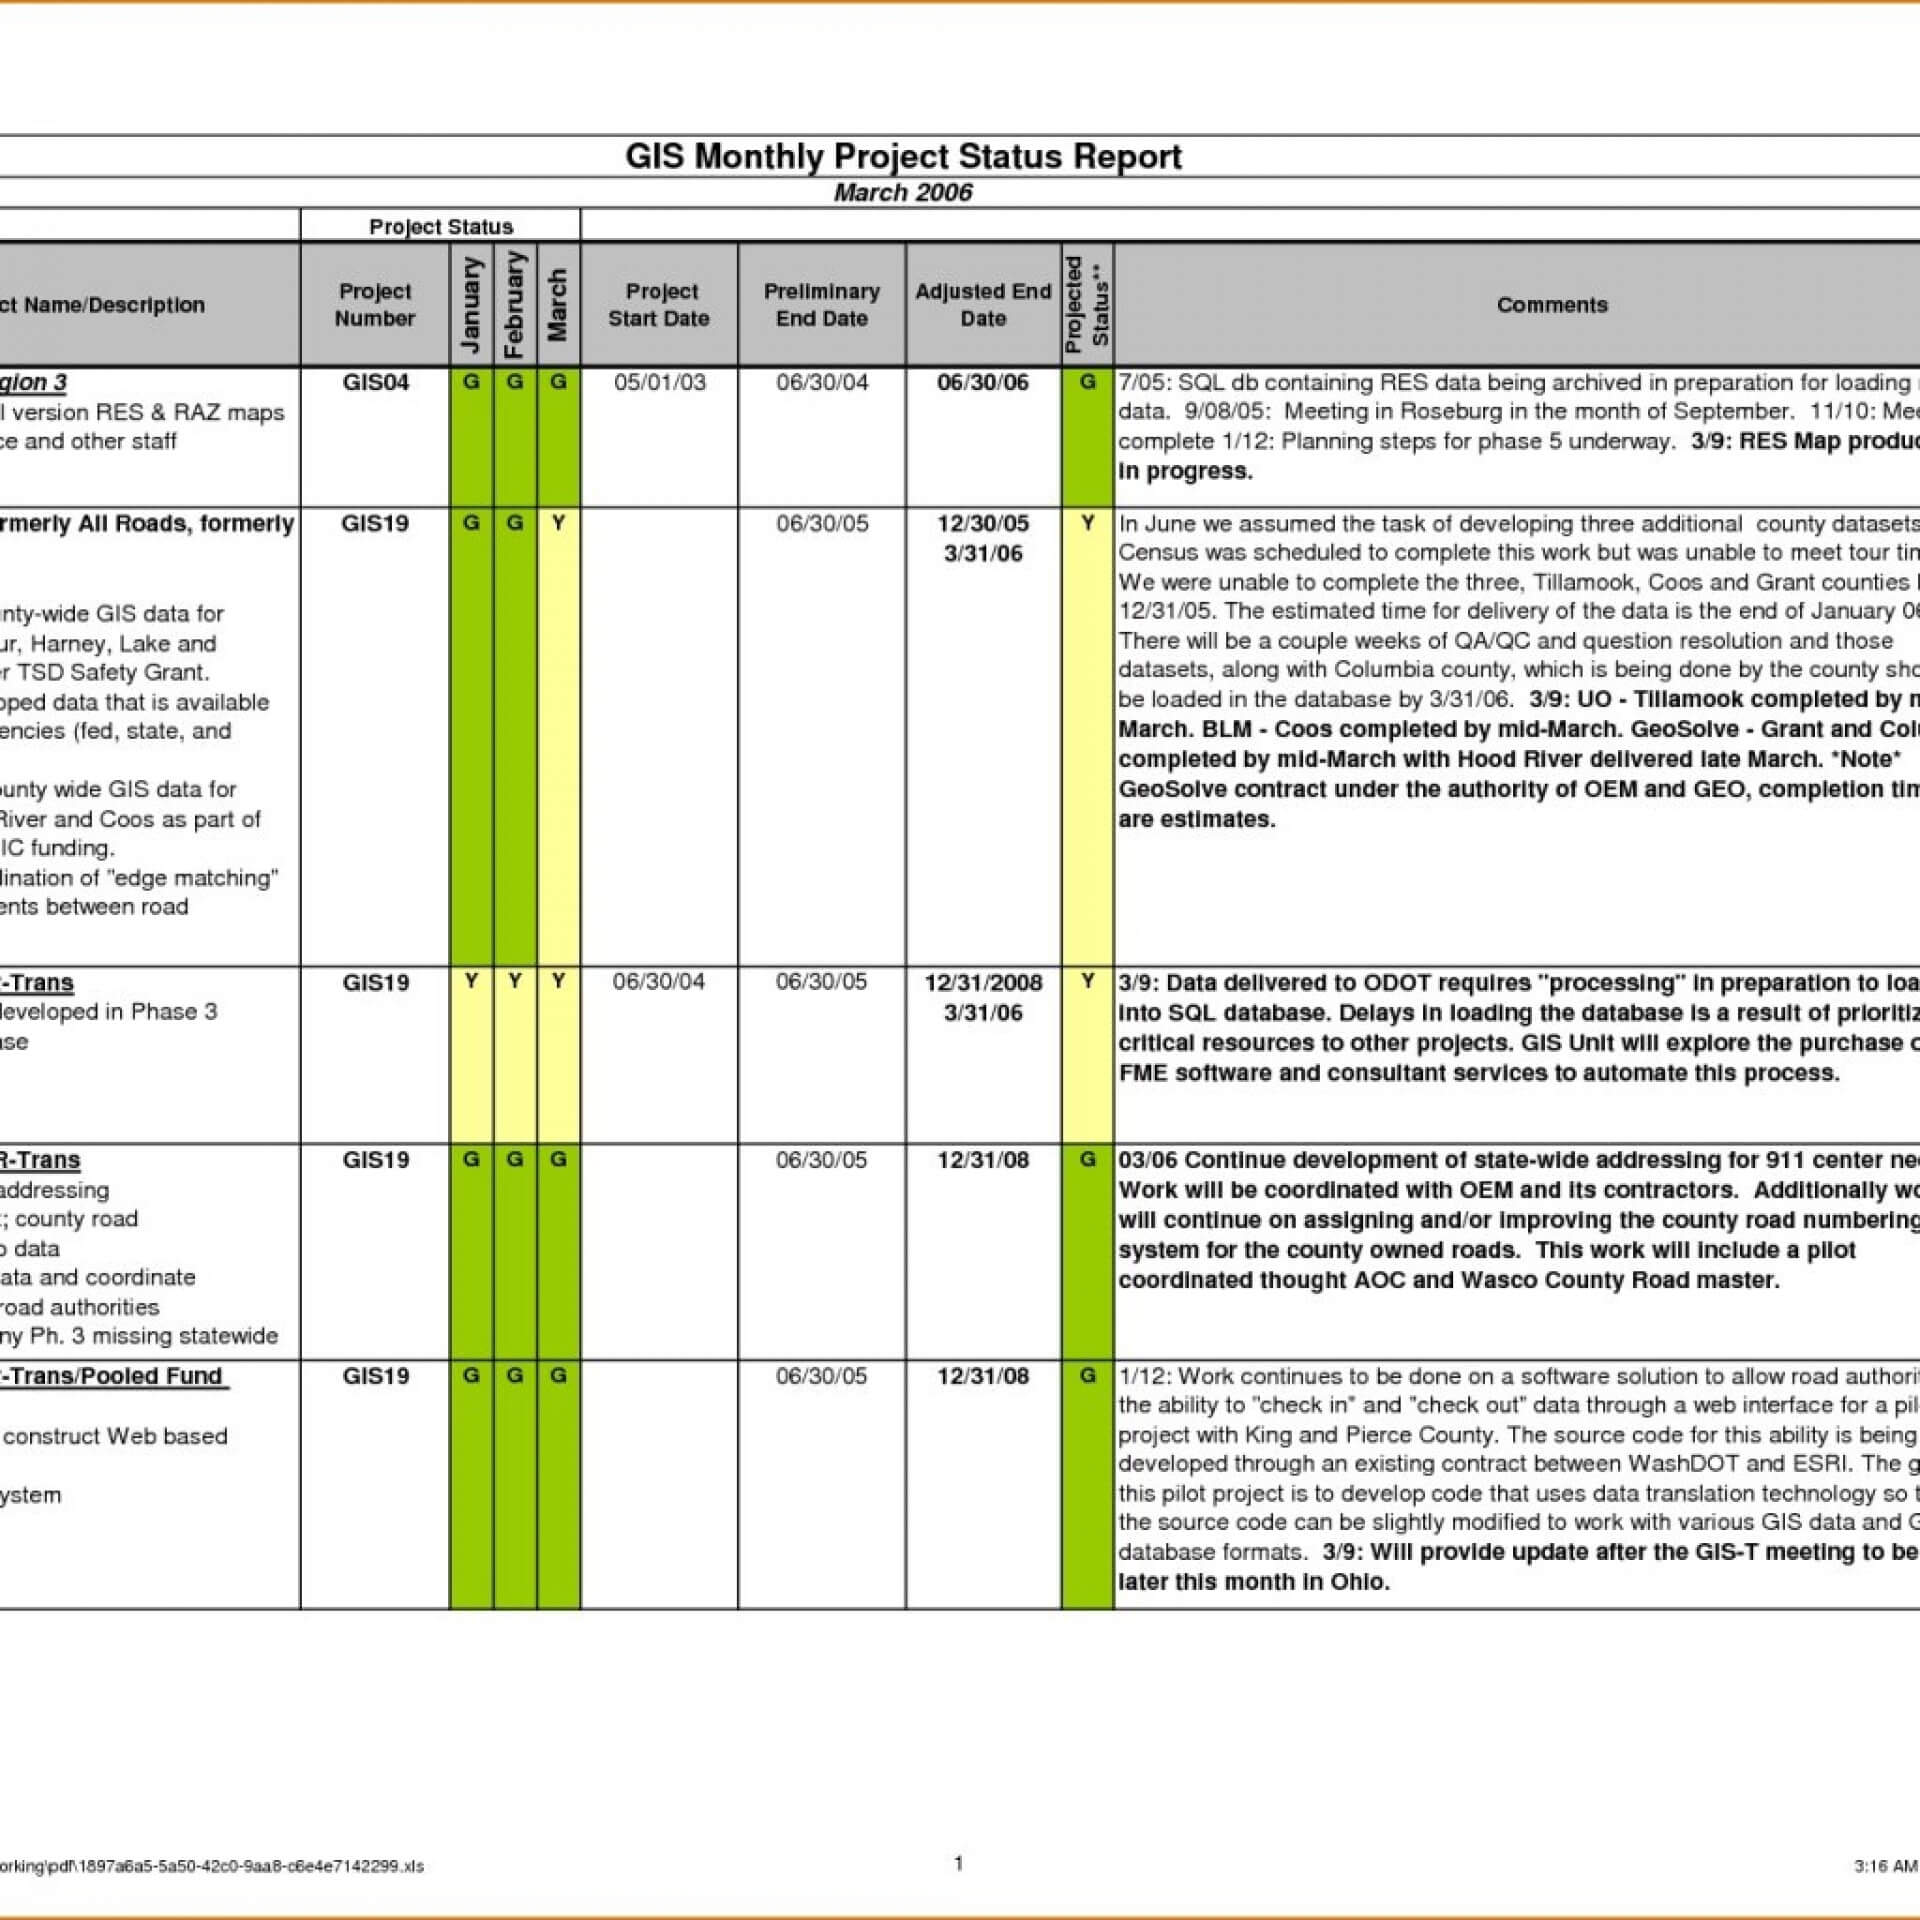 011 Project Status Report Template Excel Download Filetype Within Project Status Report Template Excel Download Filetype Xls